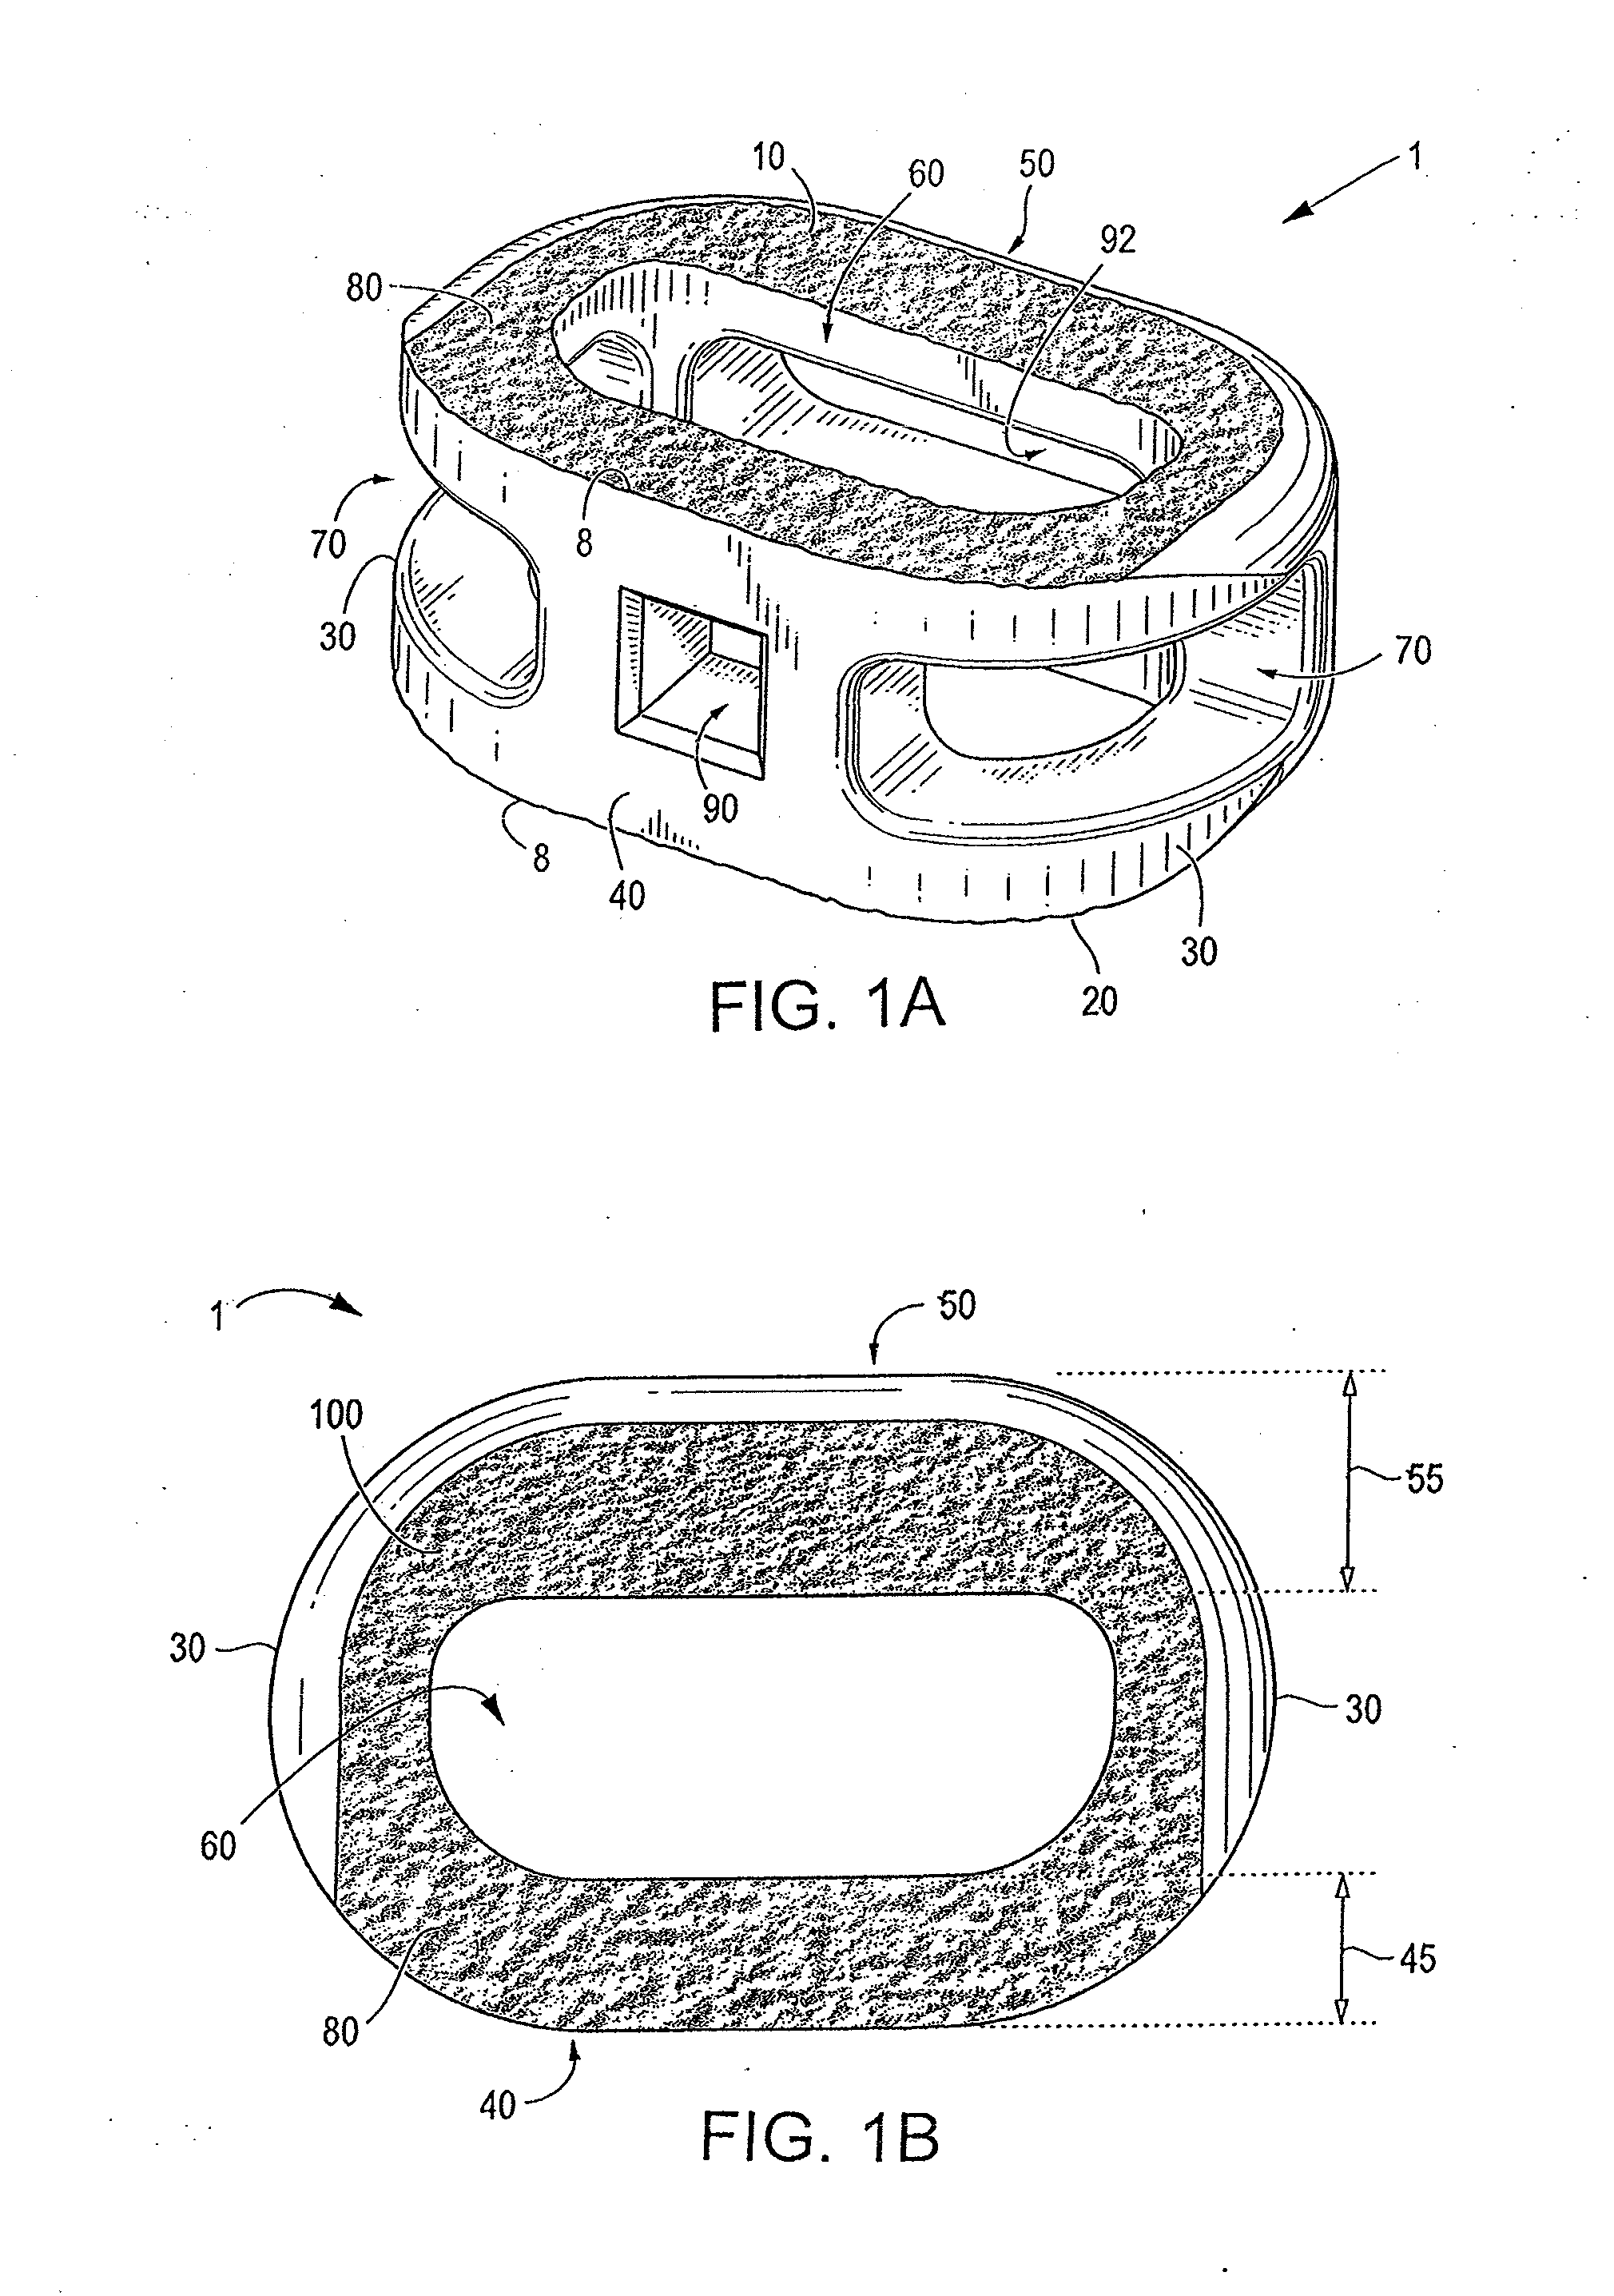 Endplate-preserving spinal implant having a raised expulsion-resistant edge